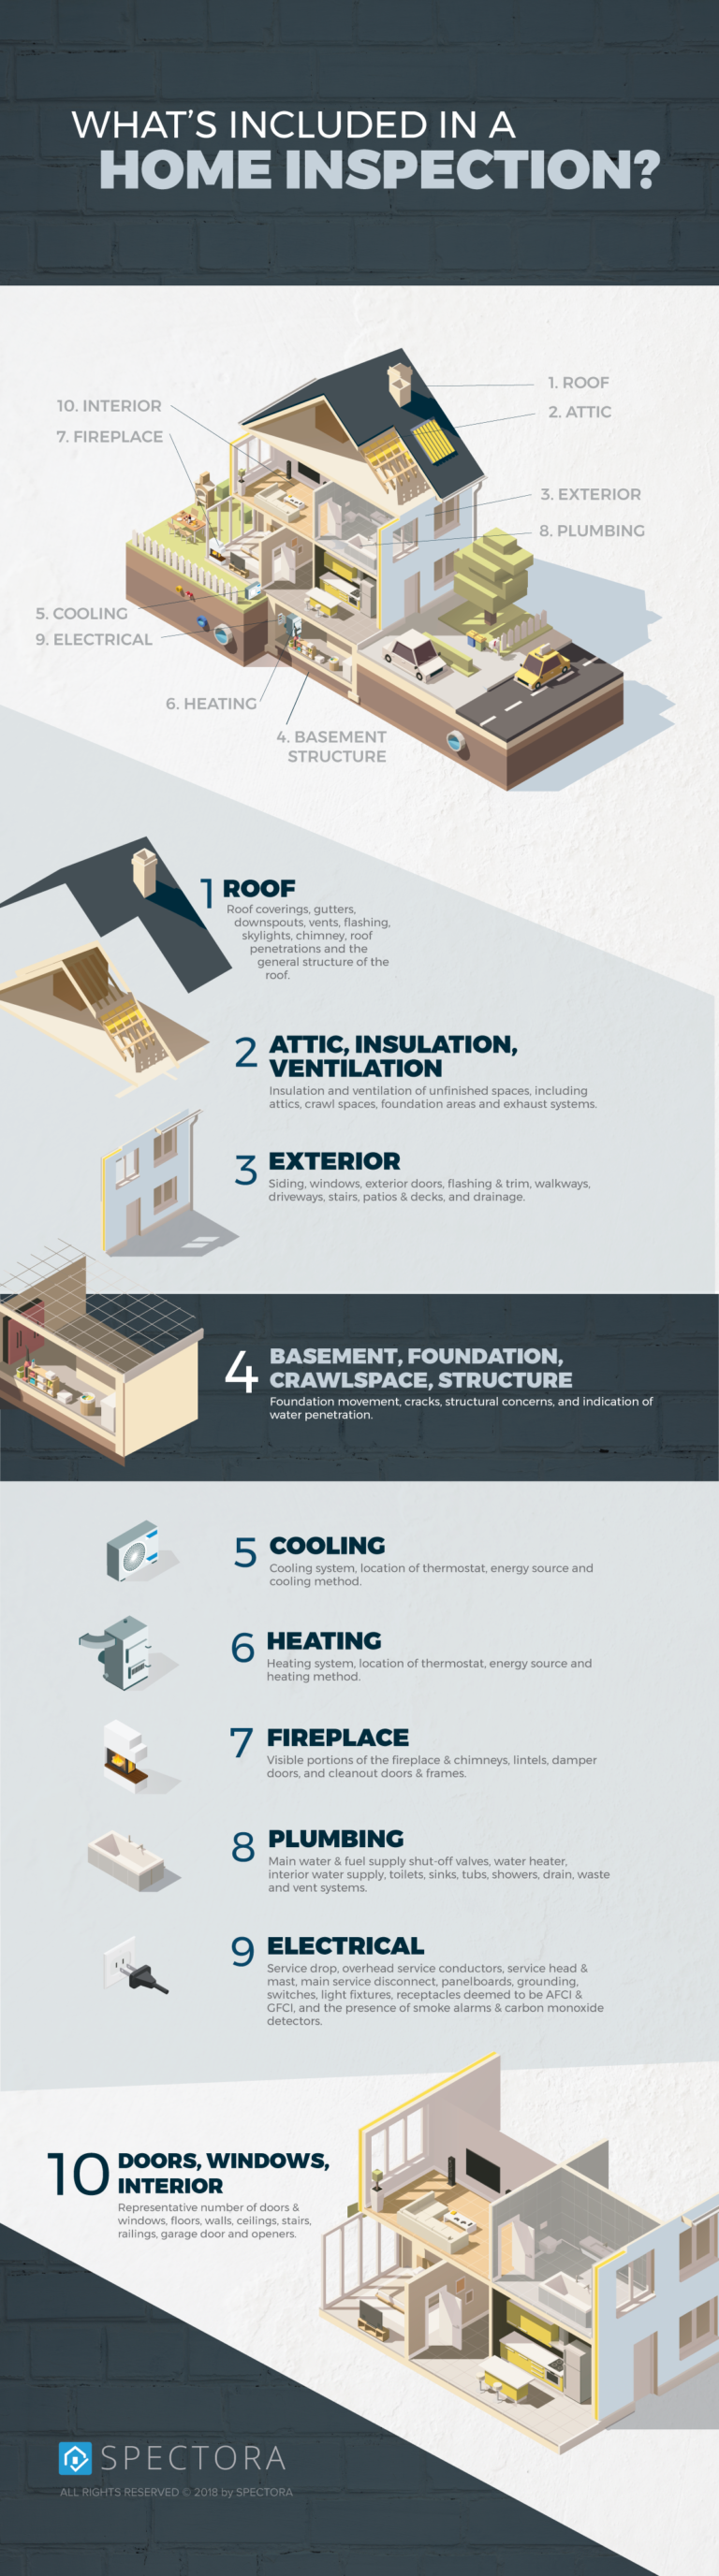 What's Included in a Home Inspection